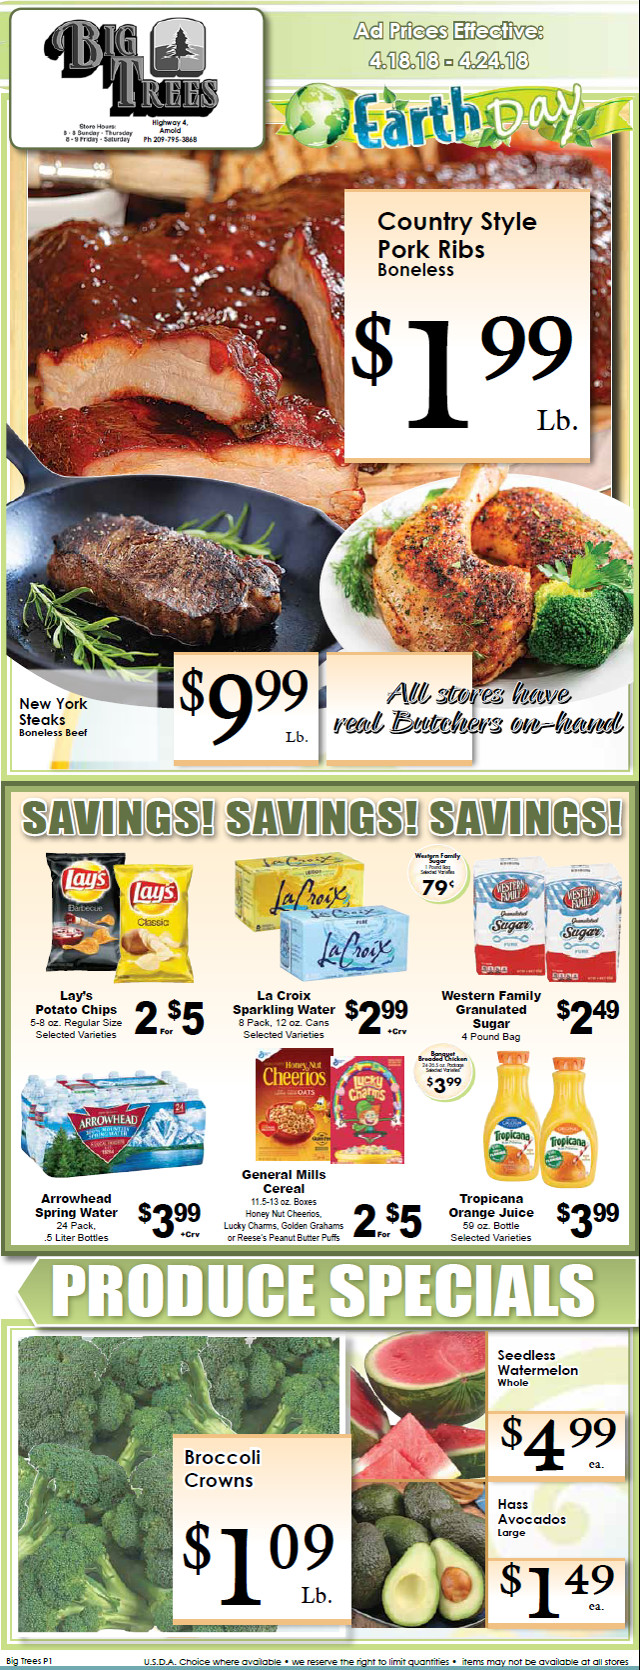 Big Trees Market Weekly Ad & Grocery Specials Through April 24th